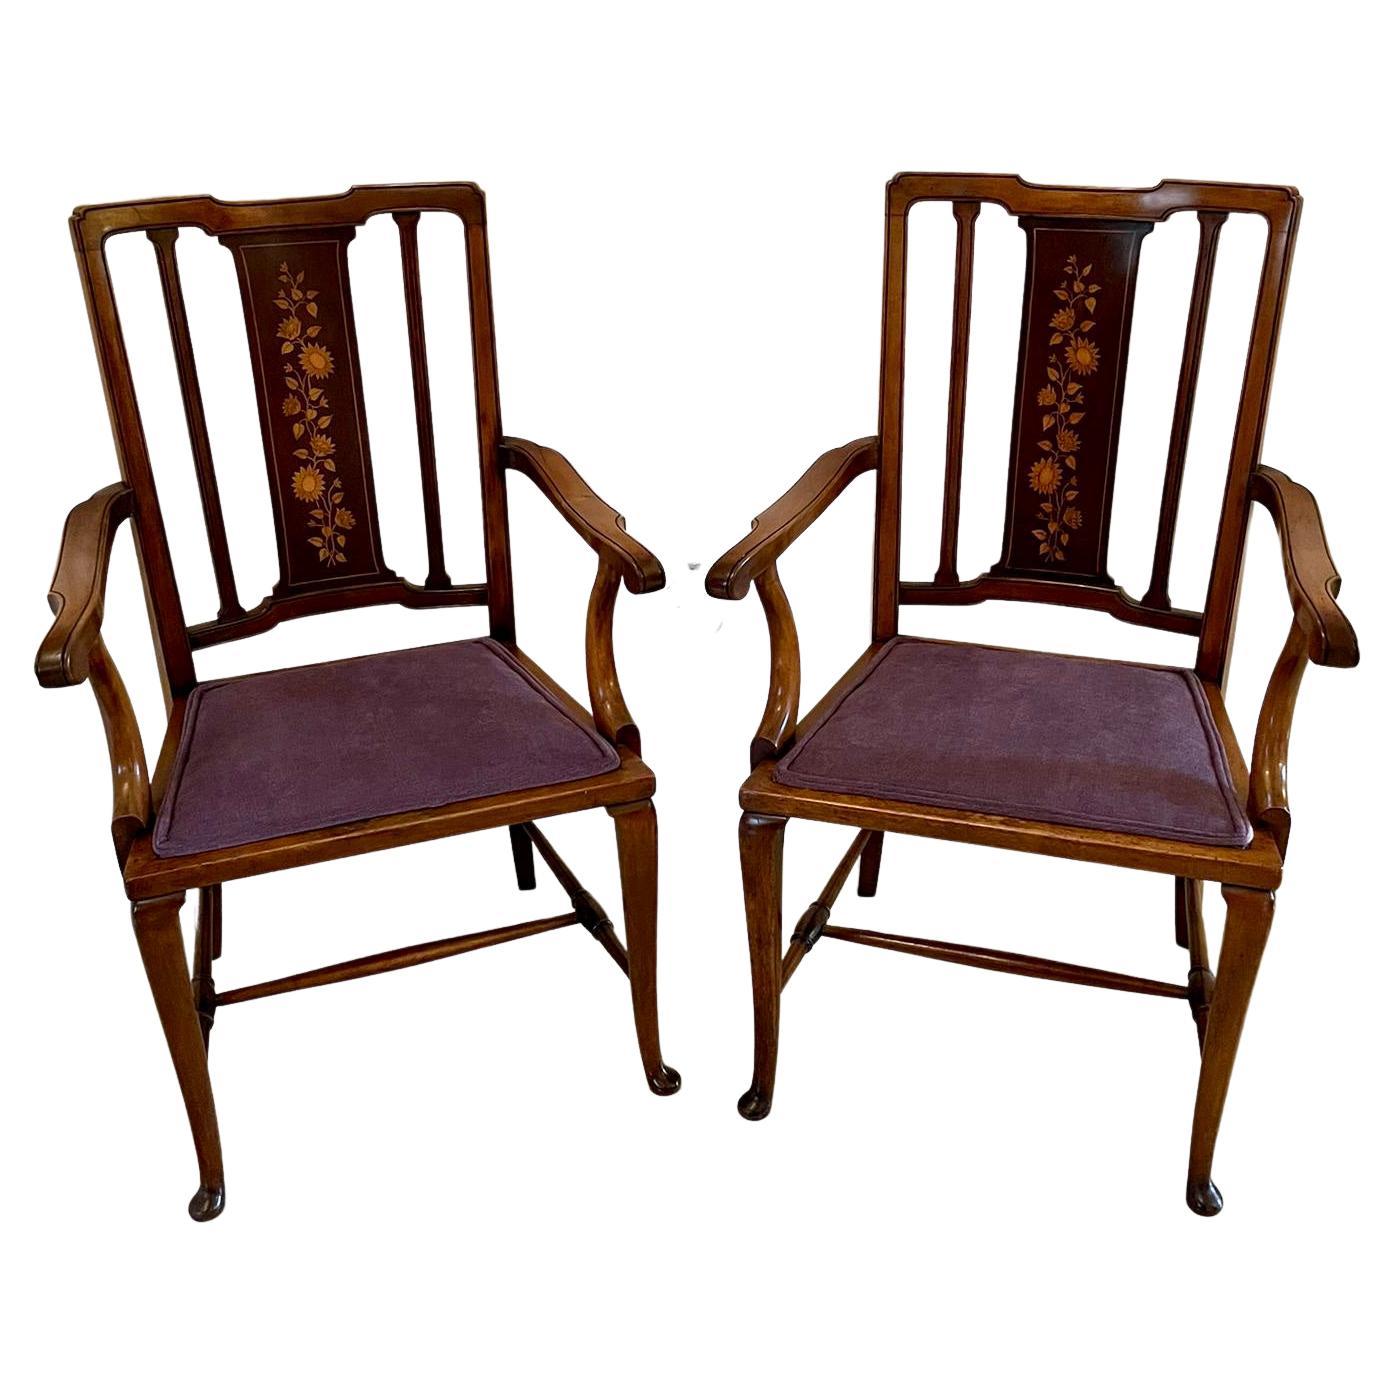 Pair of Antique Edwardian Inlaid Mahogany Desk Chairs